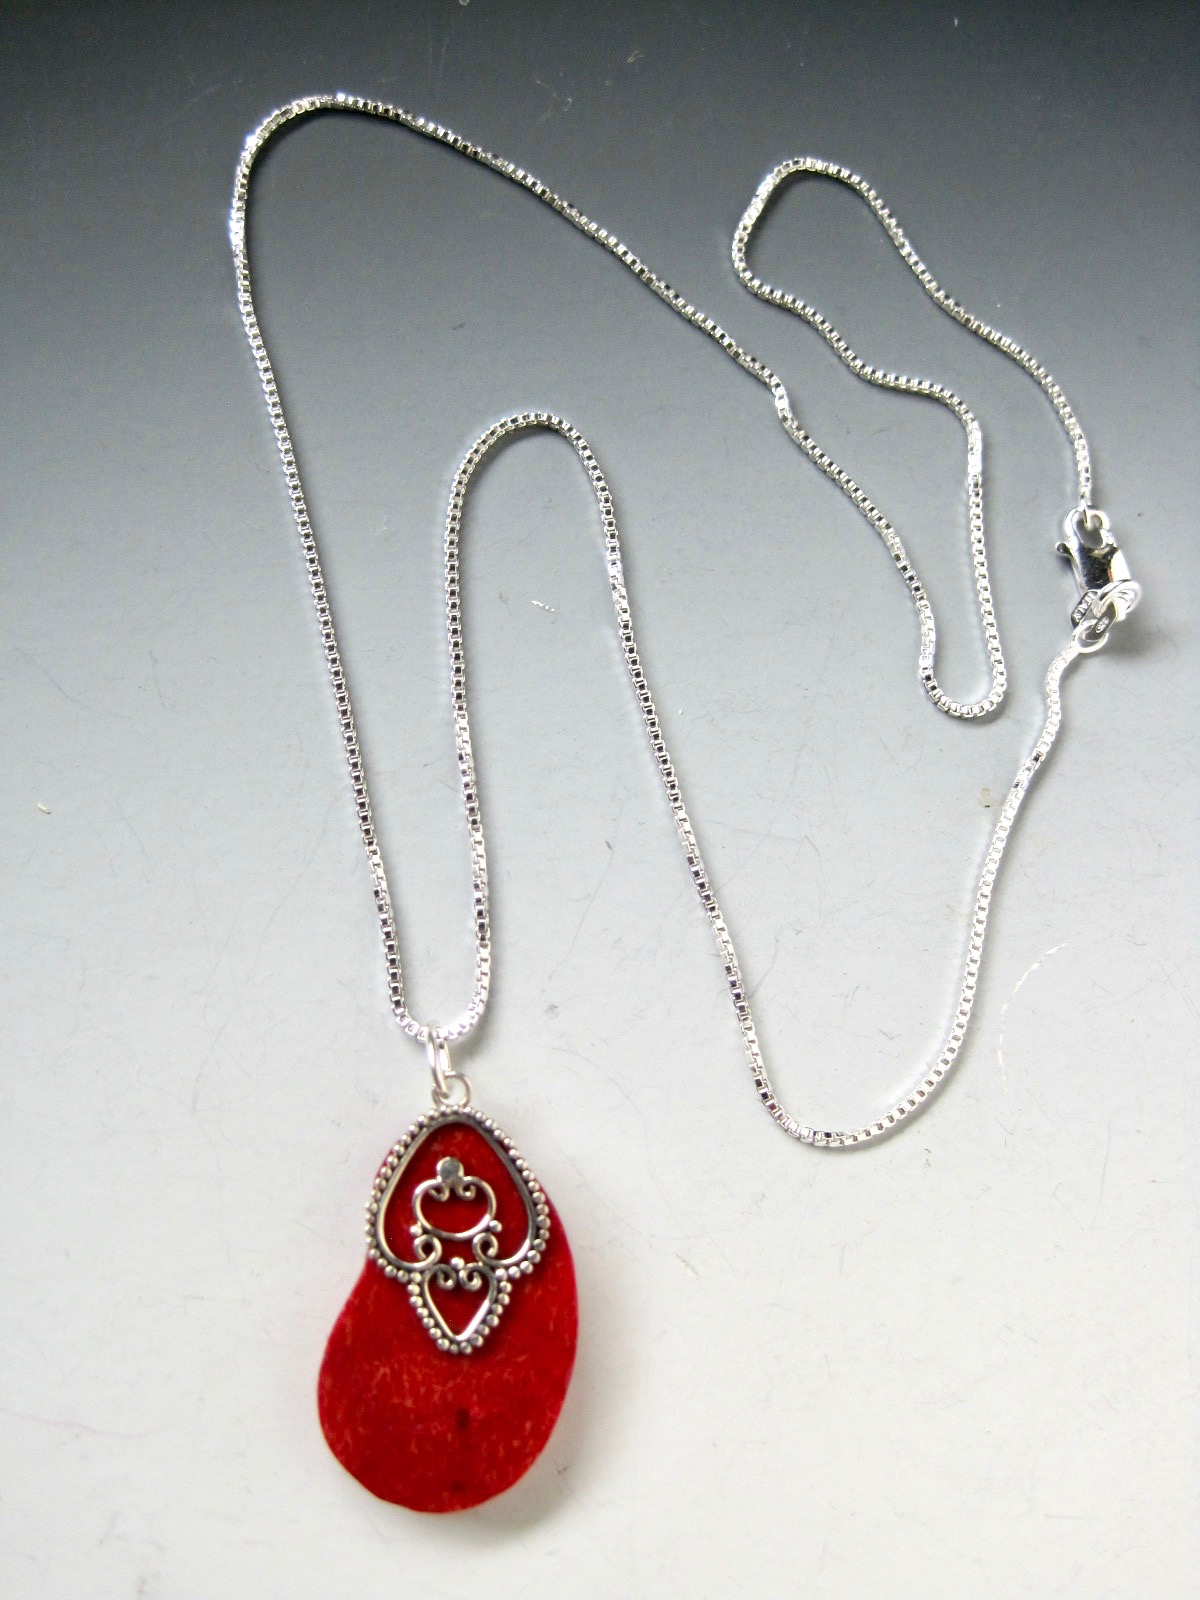 20% Off! Kidney Transplant Gift-Apple Coral and Sterling Silver Kidney ...